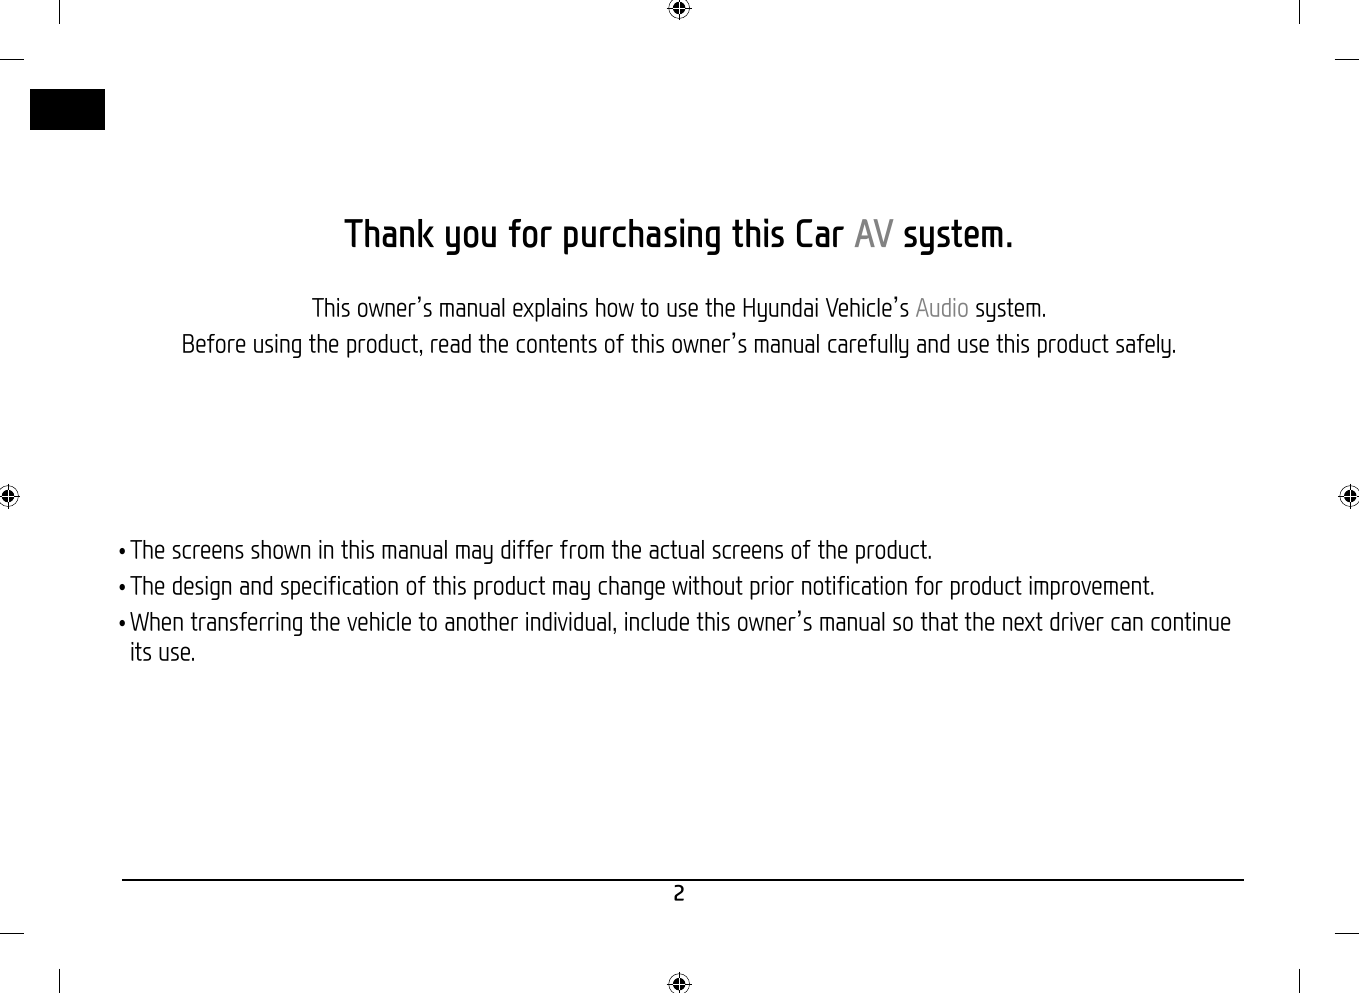 2Thank you for purchasing this Car AV system.This owner’s manual explains how to use the Hyundai Vehicle’s Audio system.Before using the product, read the contents of this owner’s manual carefully and use this product safely. •The screens shown in this manual may differ from the actual screens of the product. •The design and specification of this product may change without prior notification for product improvement. •When transferring the vehicle to another individual, include this owner’s manual so that the next driver can continueits use.